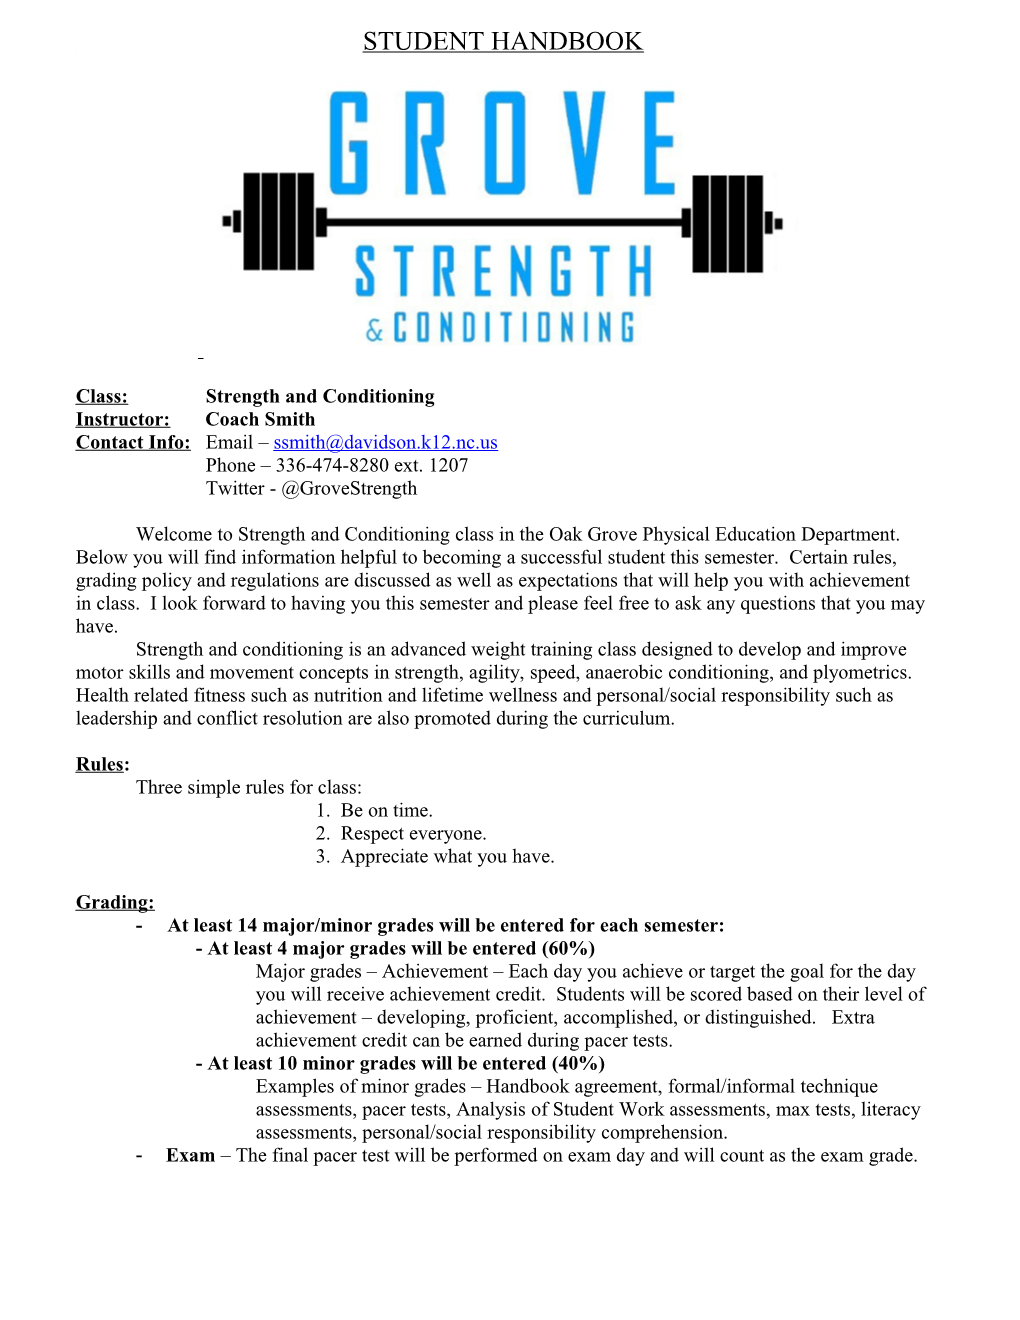 Class: Strength and Conditioning